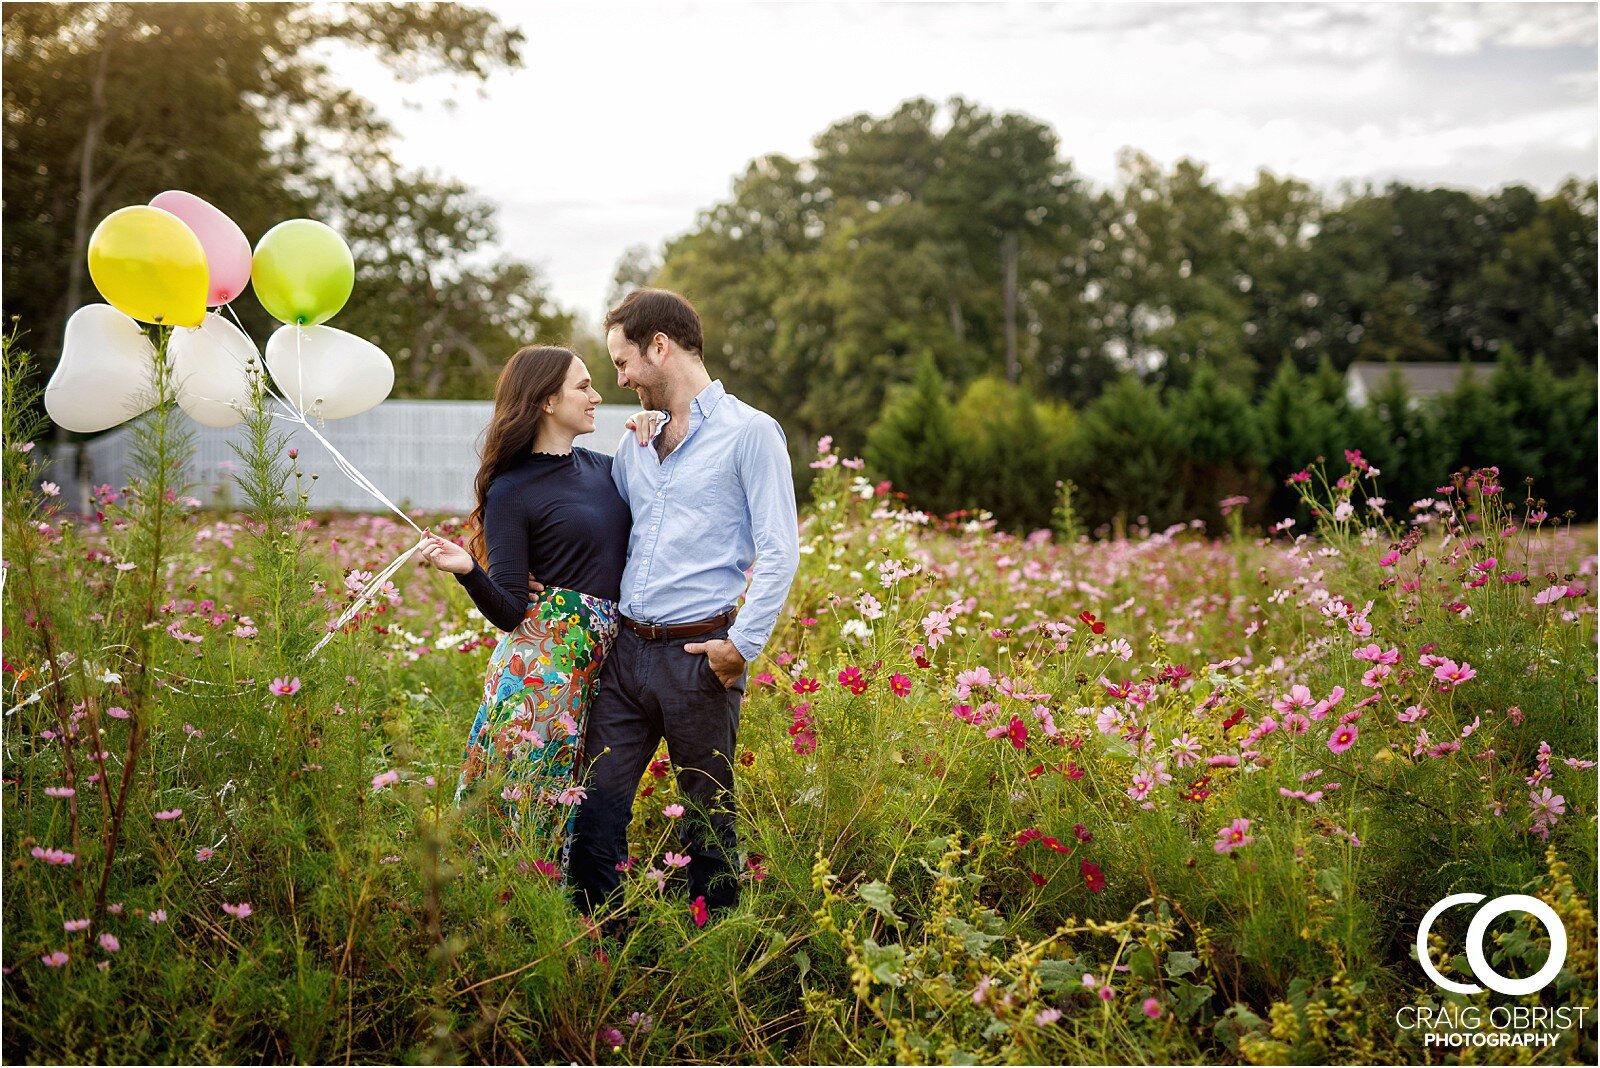 The Barn at Little River Little River Farms Engagement Wedding Portraits Fairy Tale_0019.jpg